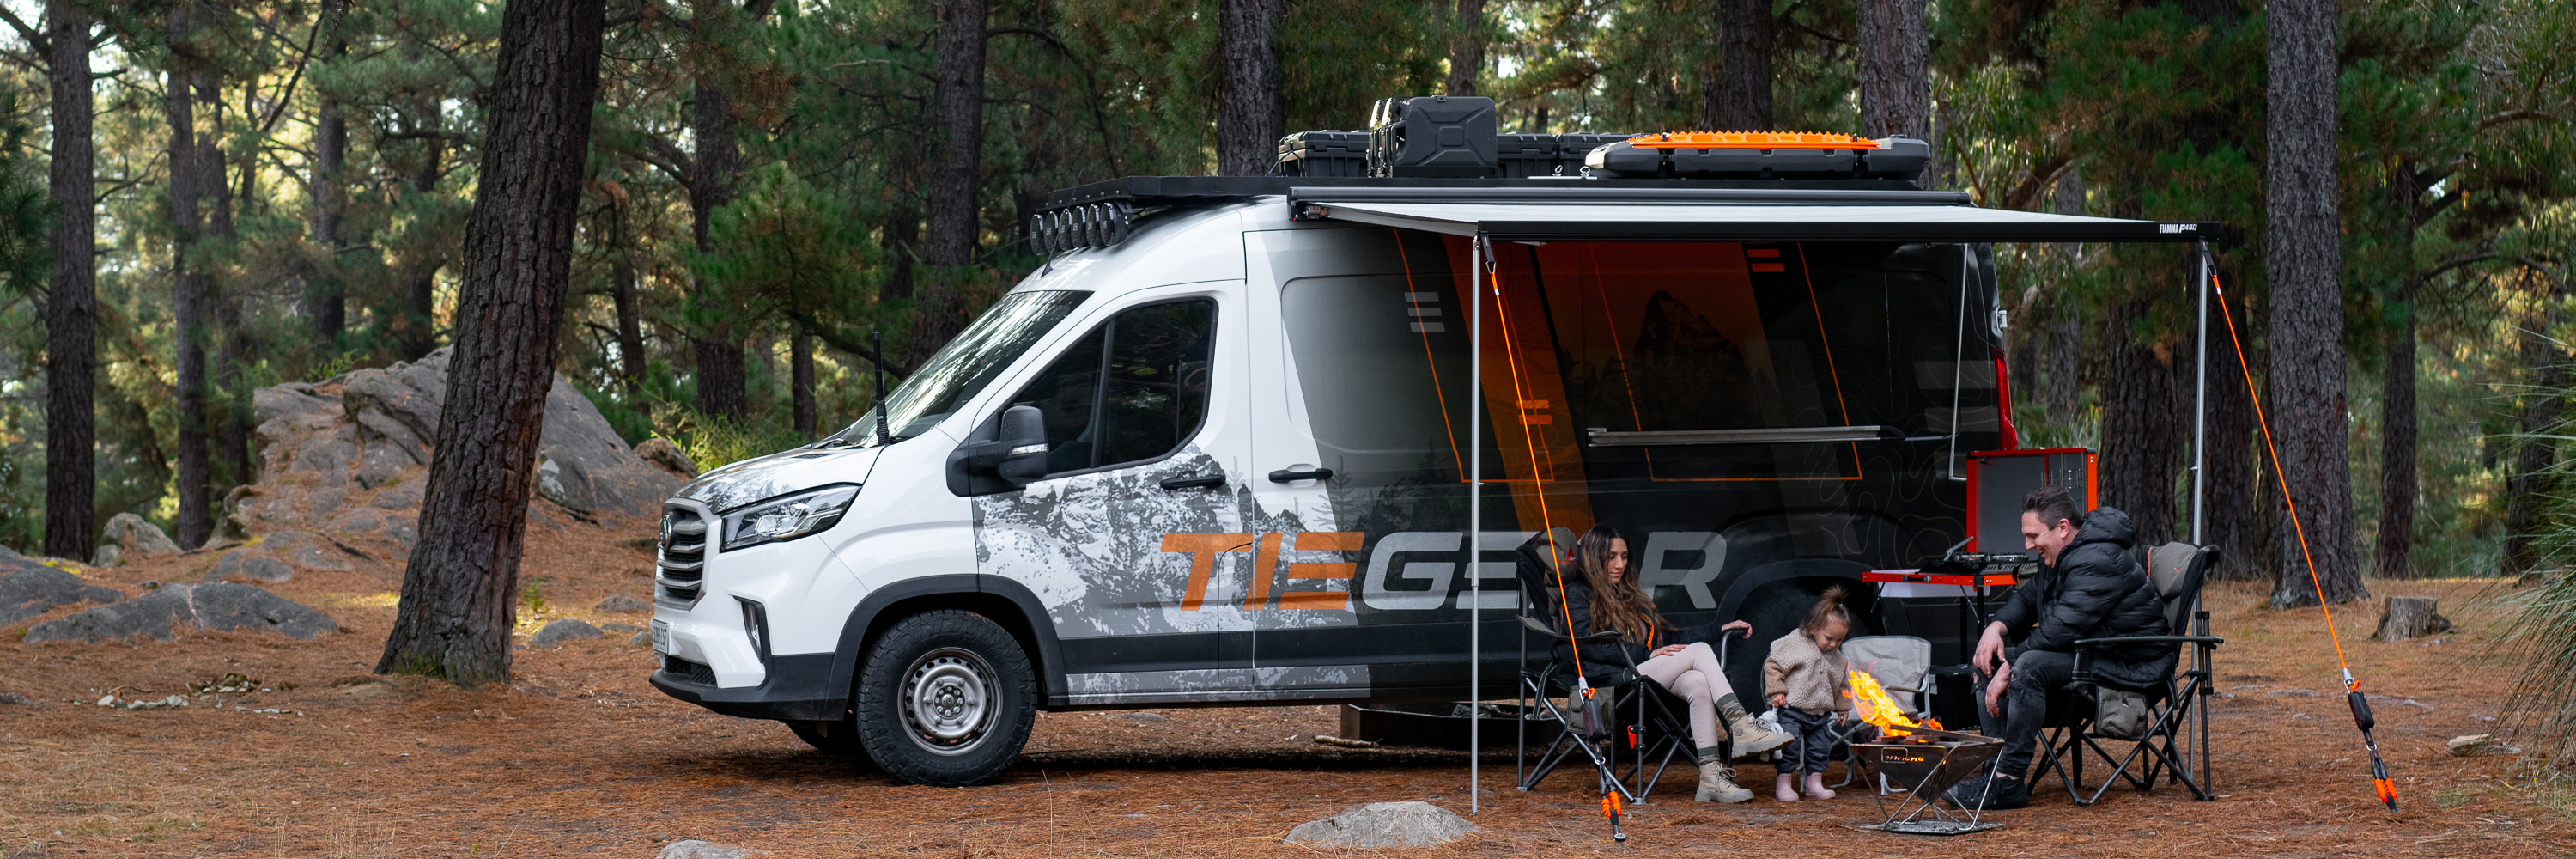 Sitting around the fire in the forrest camping with the family | Van camping | Camping Accessories | Tiegear Guy Rope | Screw in Pegs 